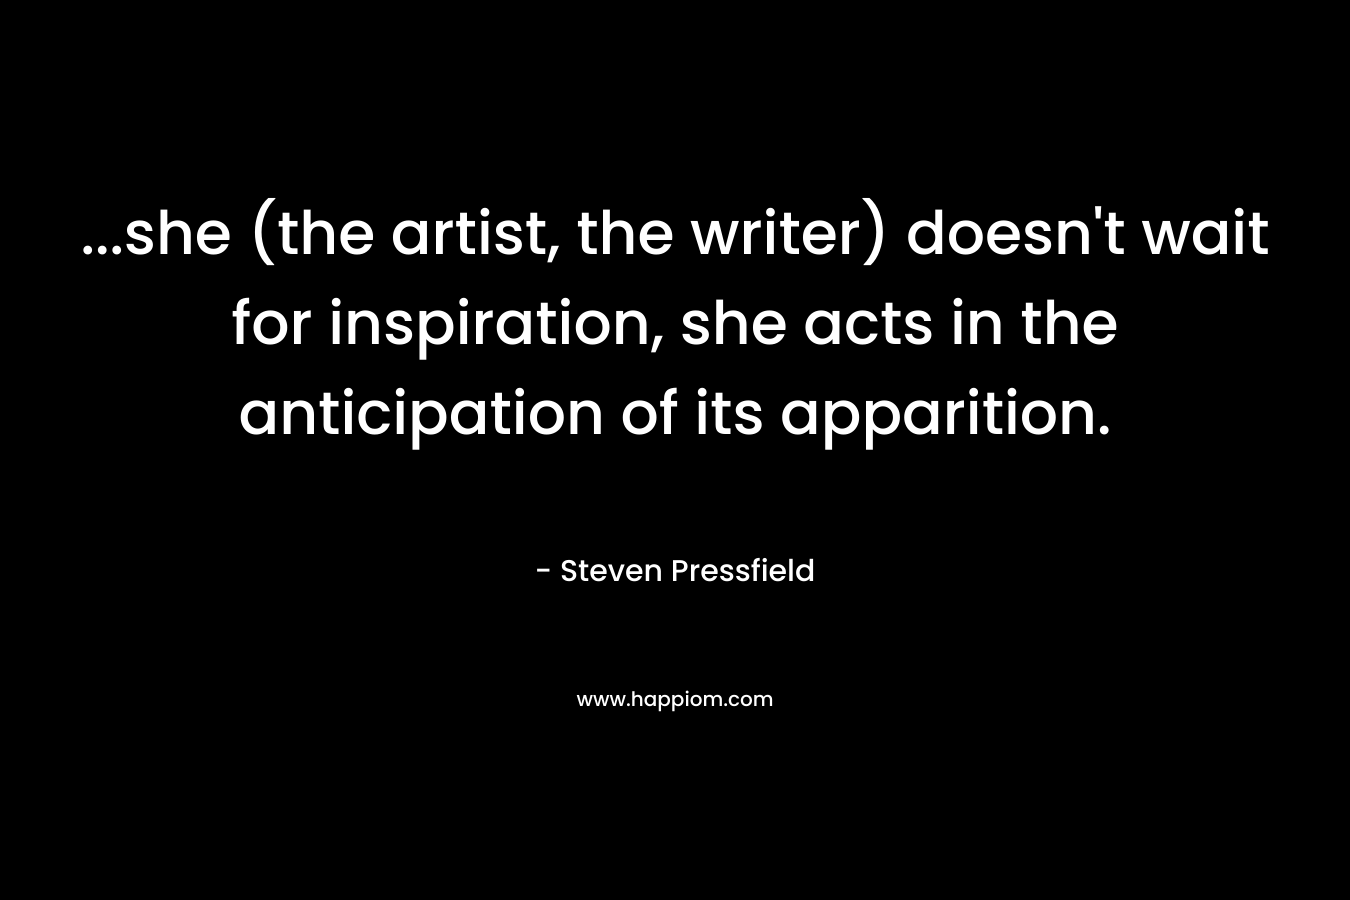 ...she (the artist, the writer) doesn't wait for inspiration, she acts in the anticipation of its apparition.